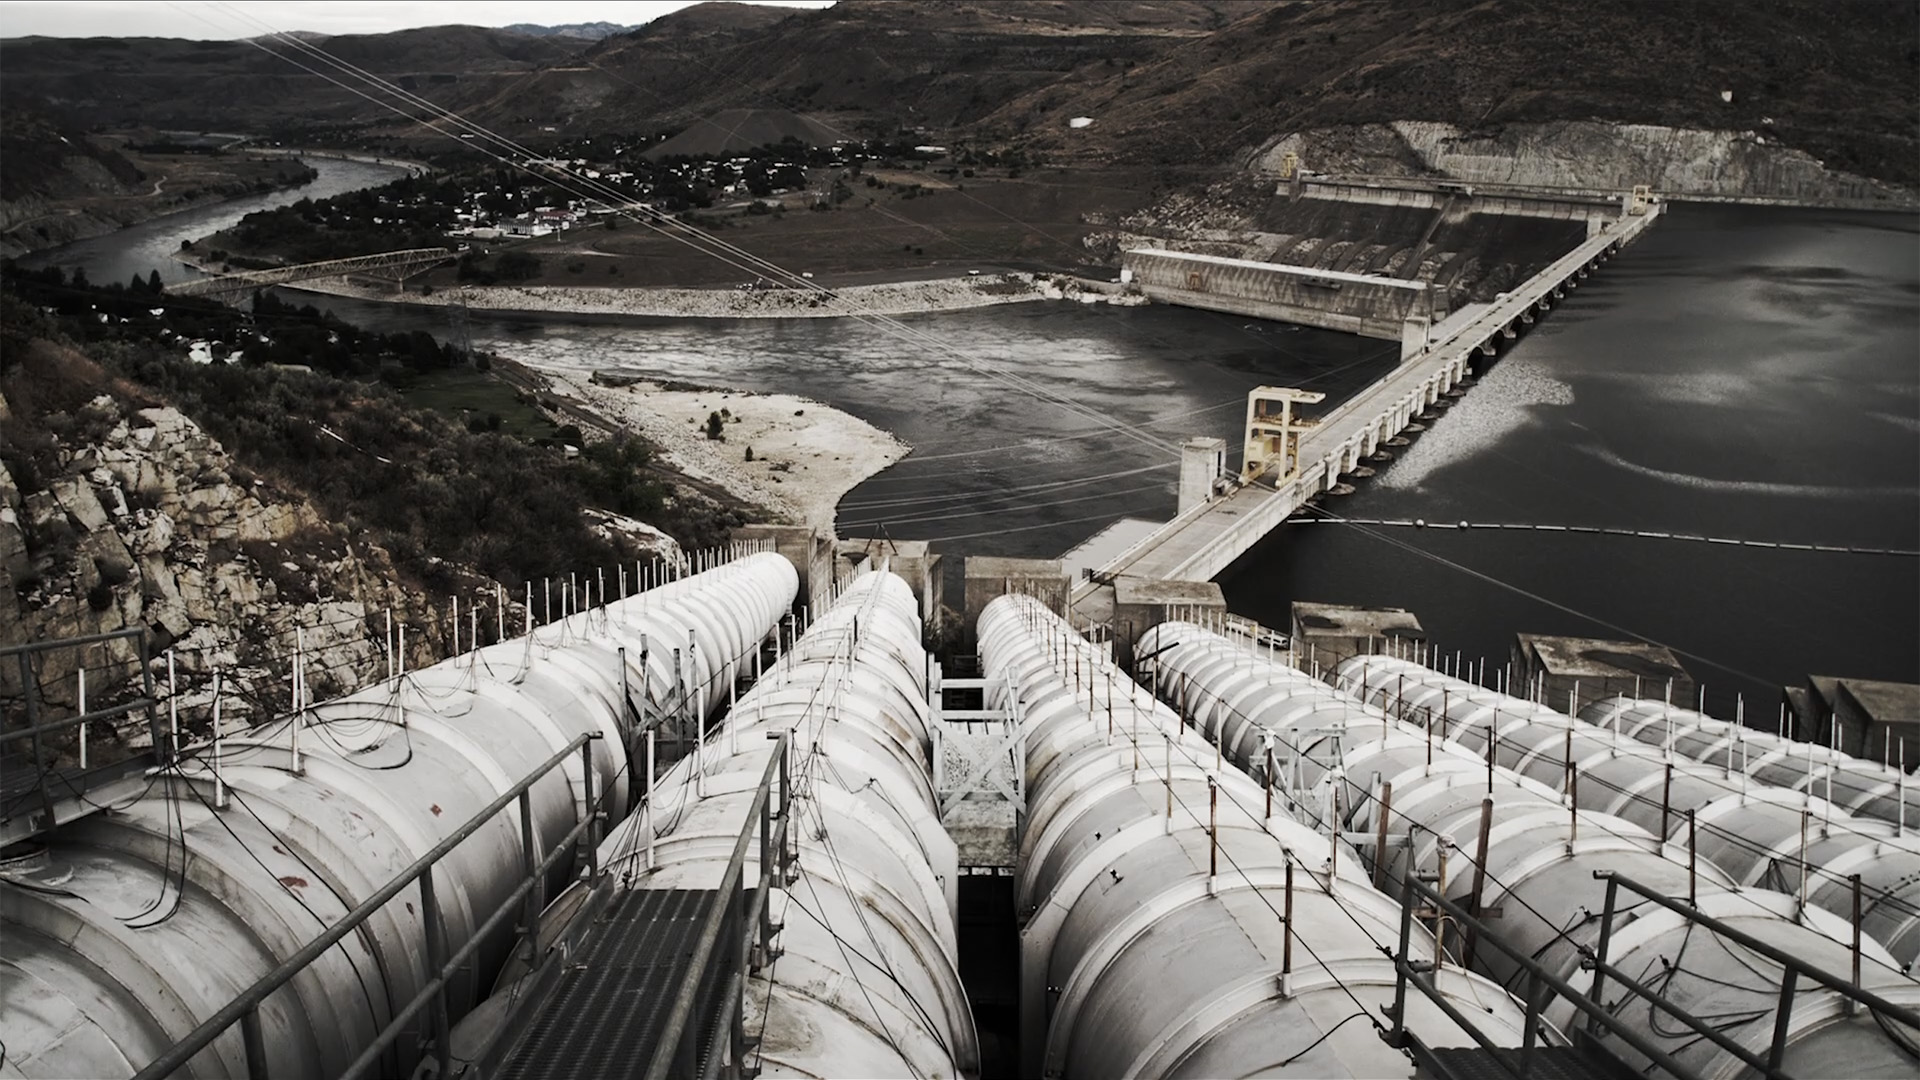 Understanding Greenhouse Gas Emissions from Hydropower, Dams and Reservoirs